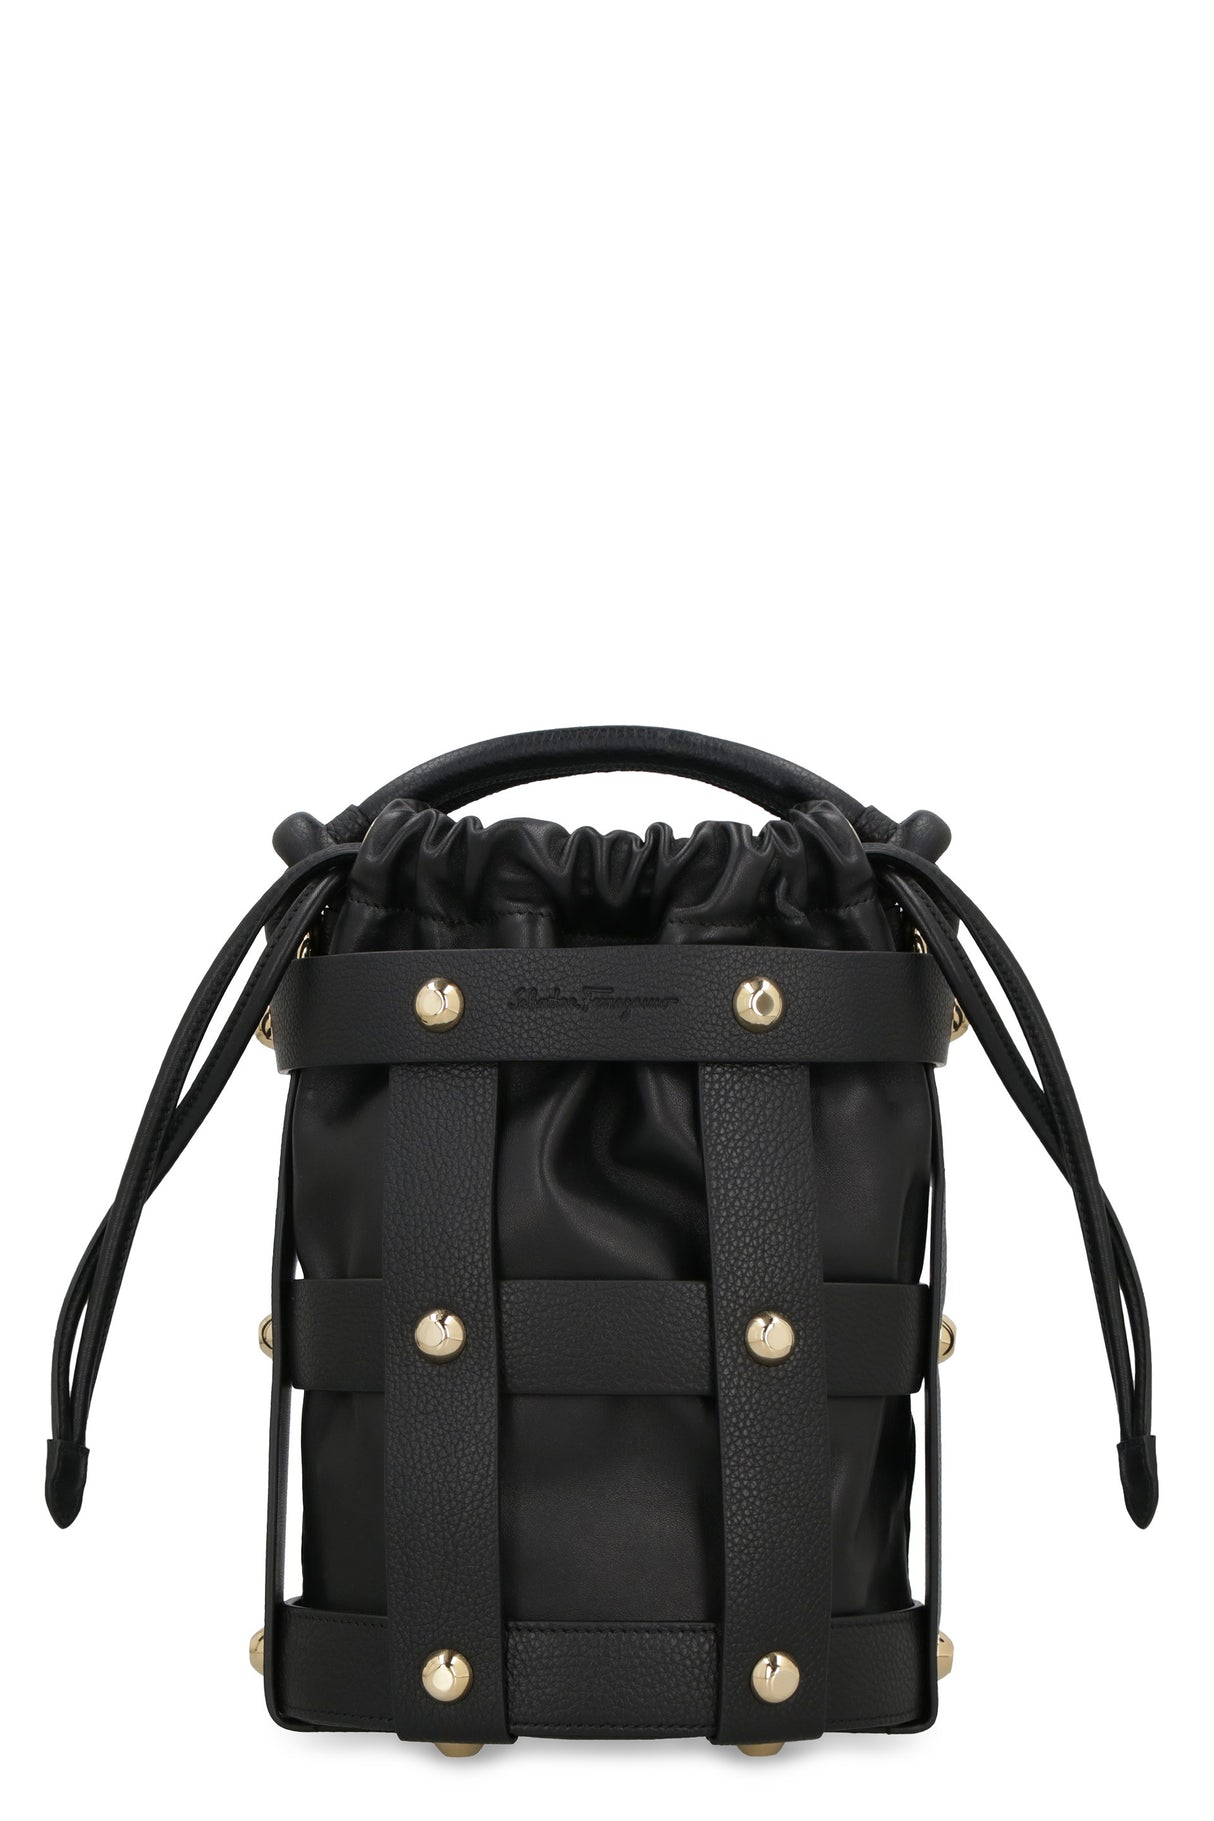 Black Leather Women's Bucket Bag with Gold-Tone Studs and Drawstring Closure